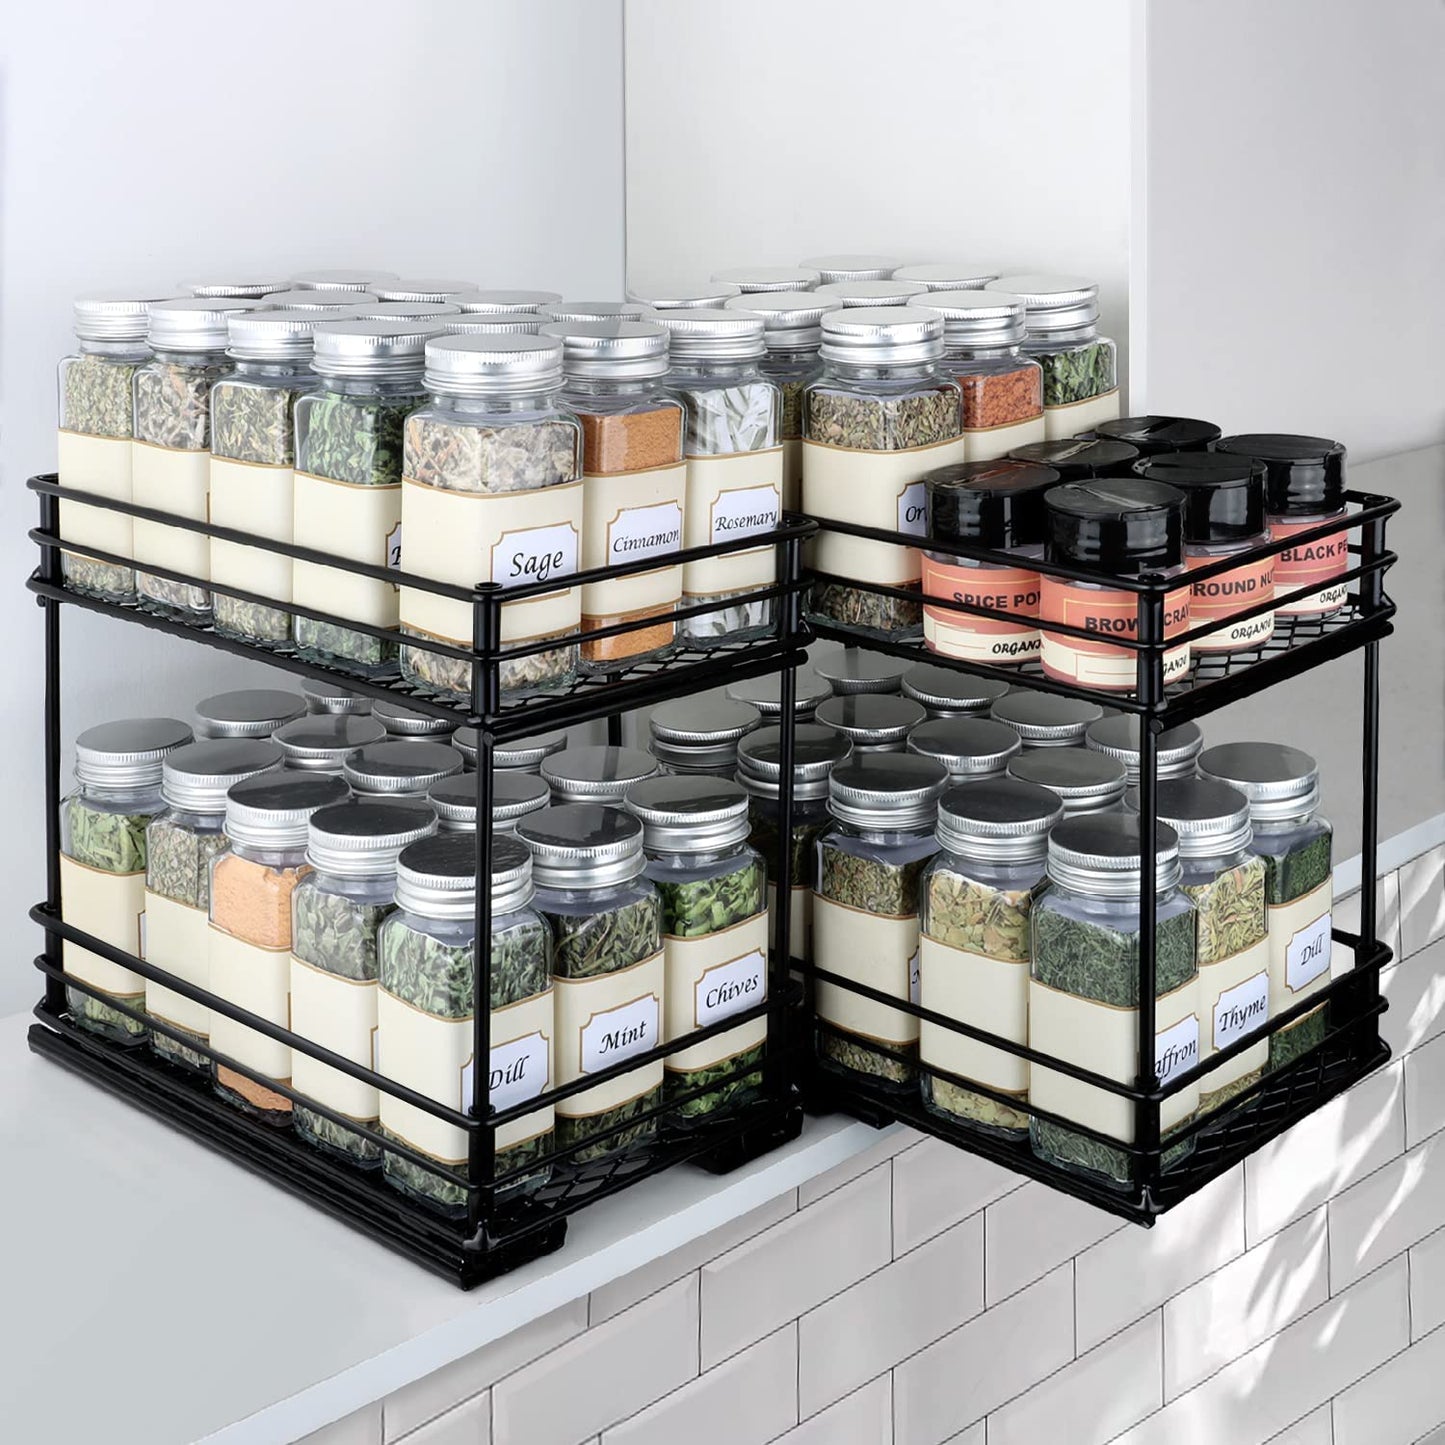 Spice Rack Organizer for Cabinet - Pull Out Double Tier Spice Rack